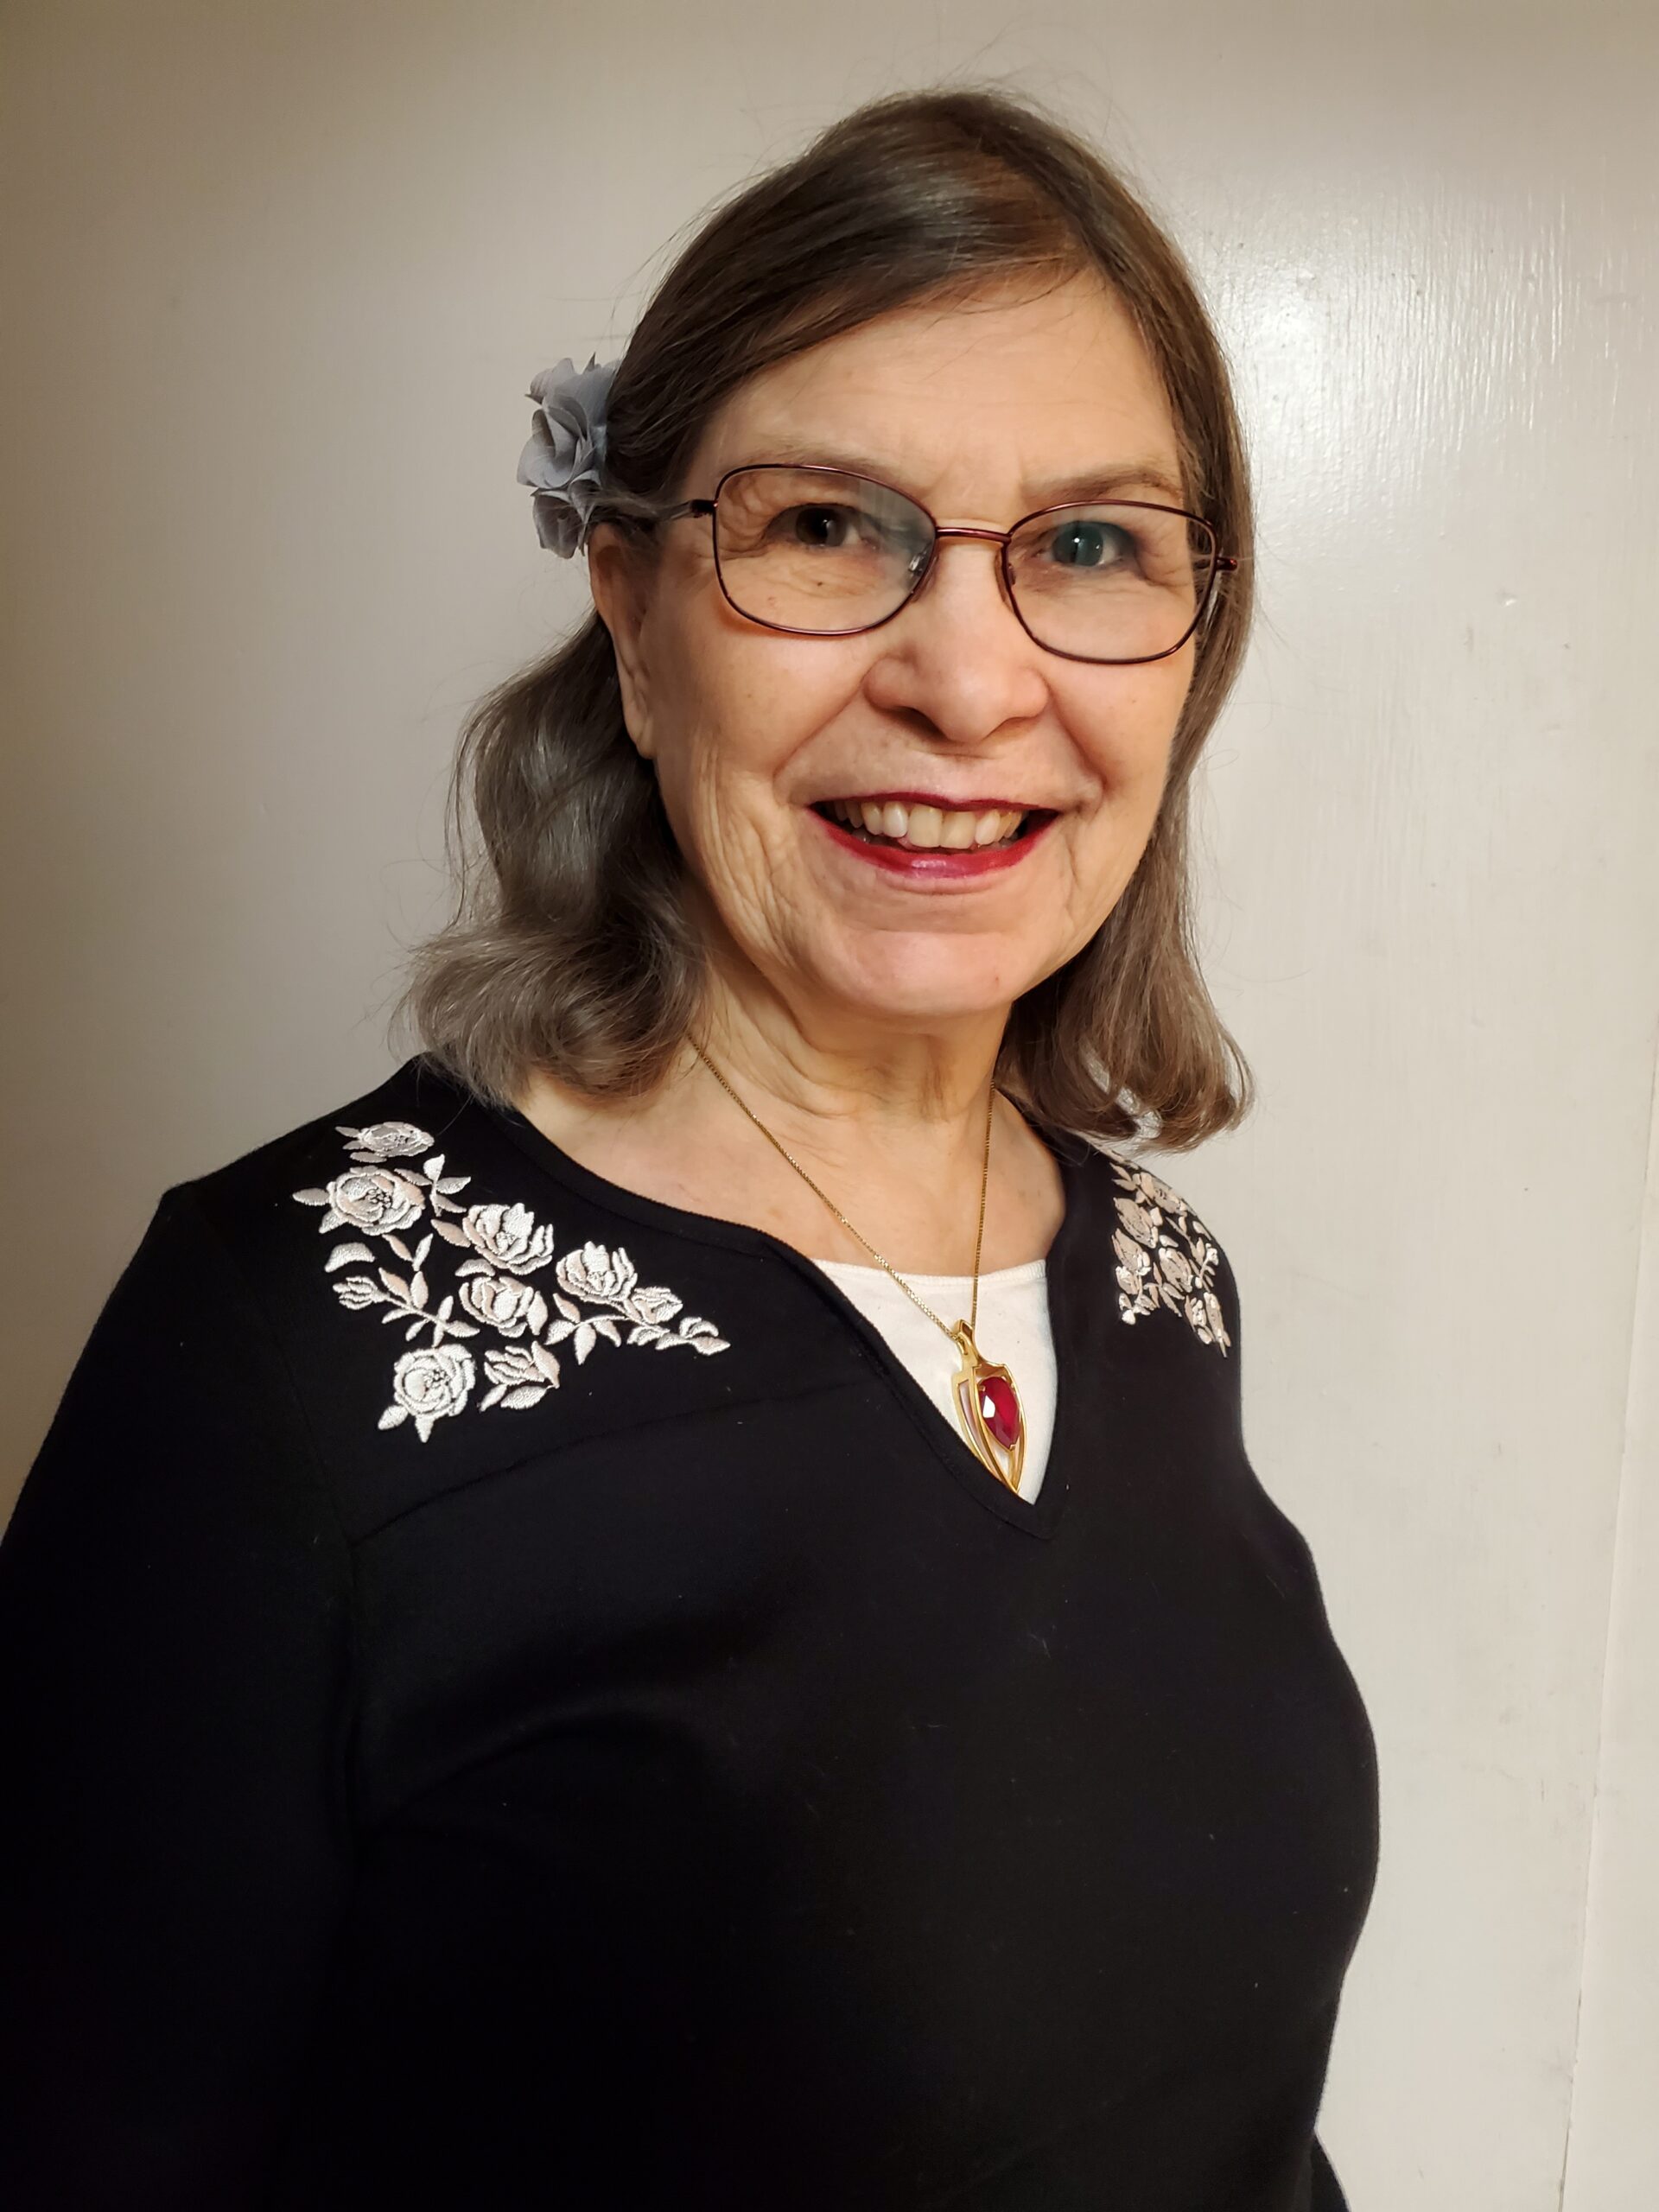 headshot of a senior white woman with medium length greying hair wearing glasses and a flower in her hair. She is smiling.